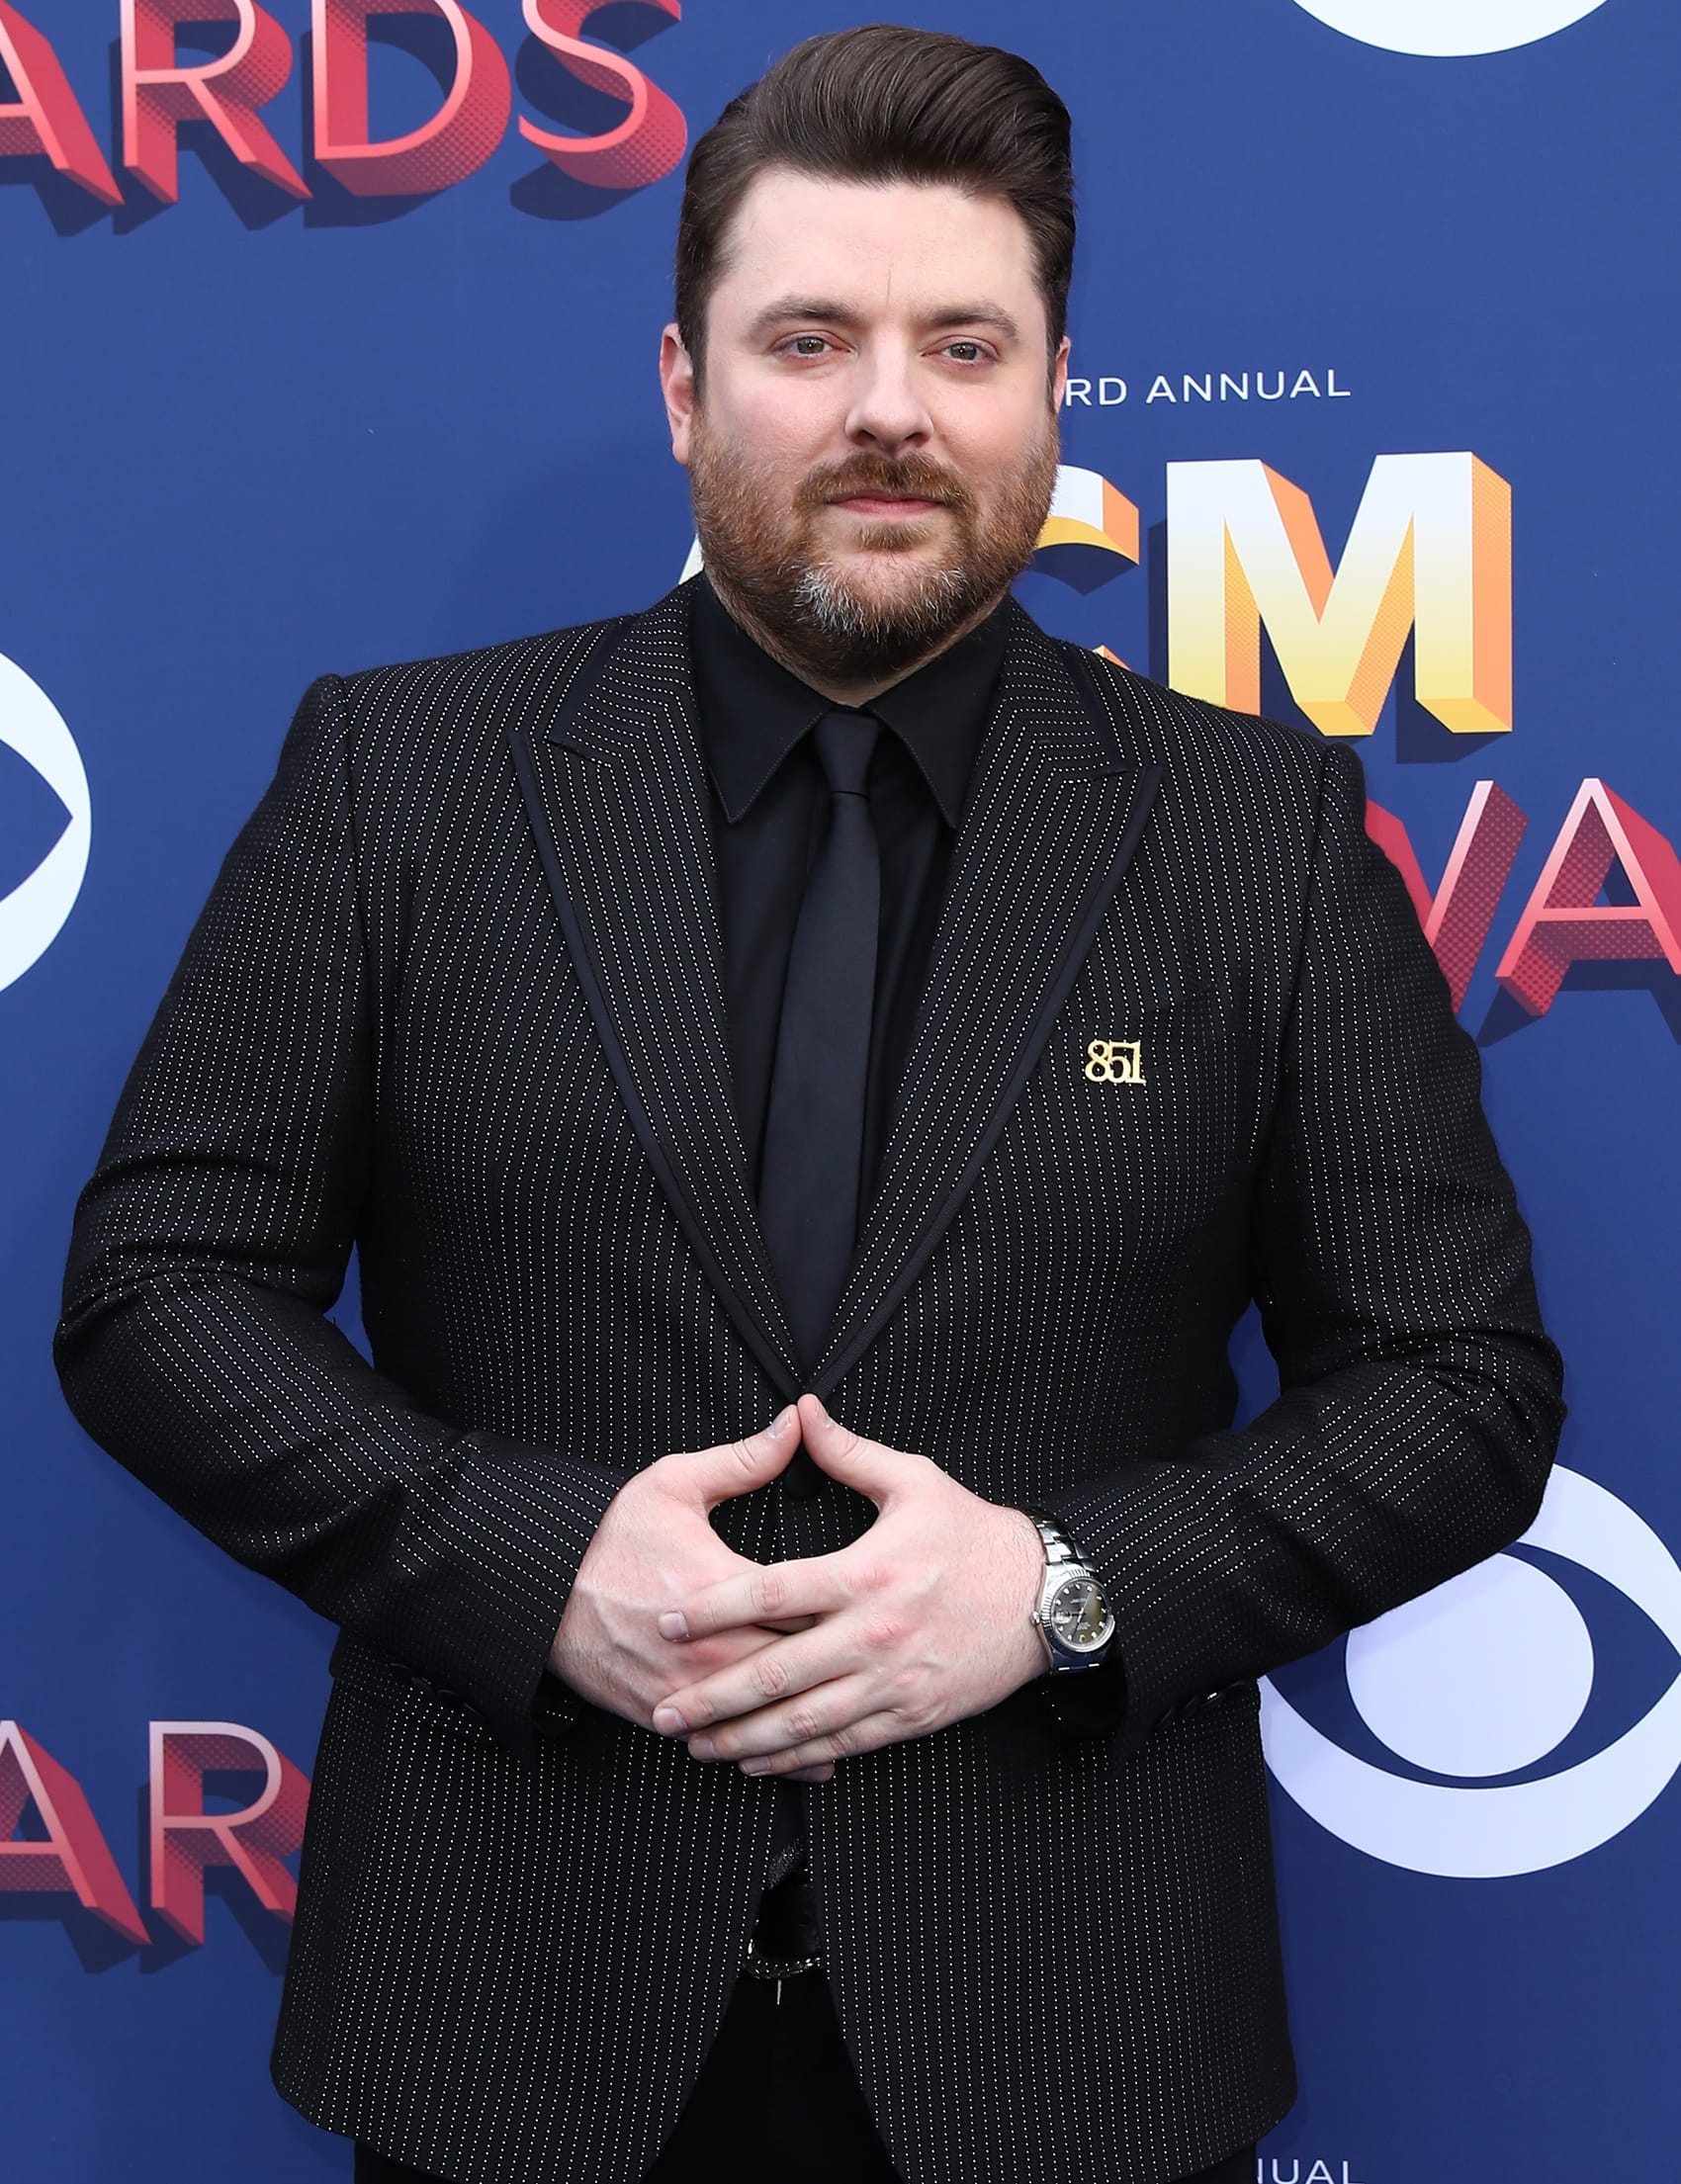 Fellow country star Chris Young was rumored to have had an affair with Miranda Lambert